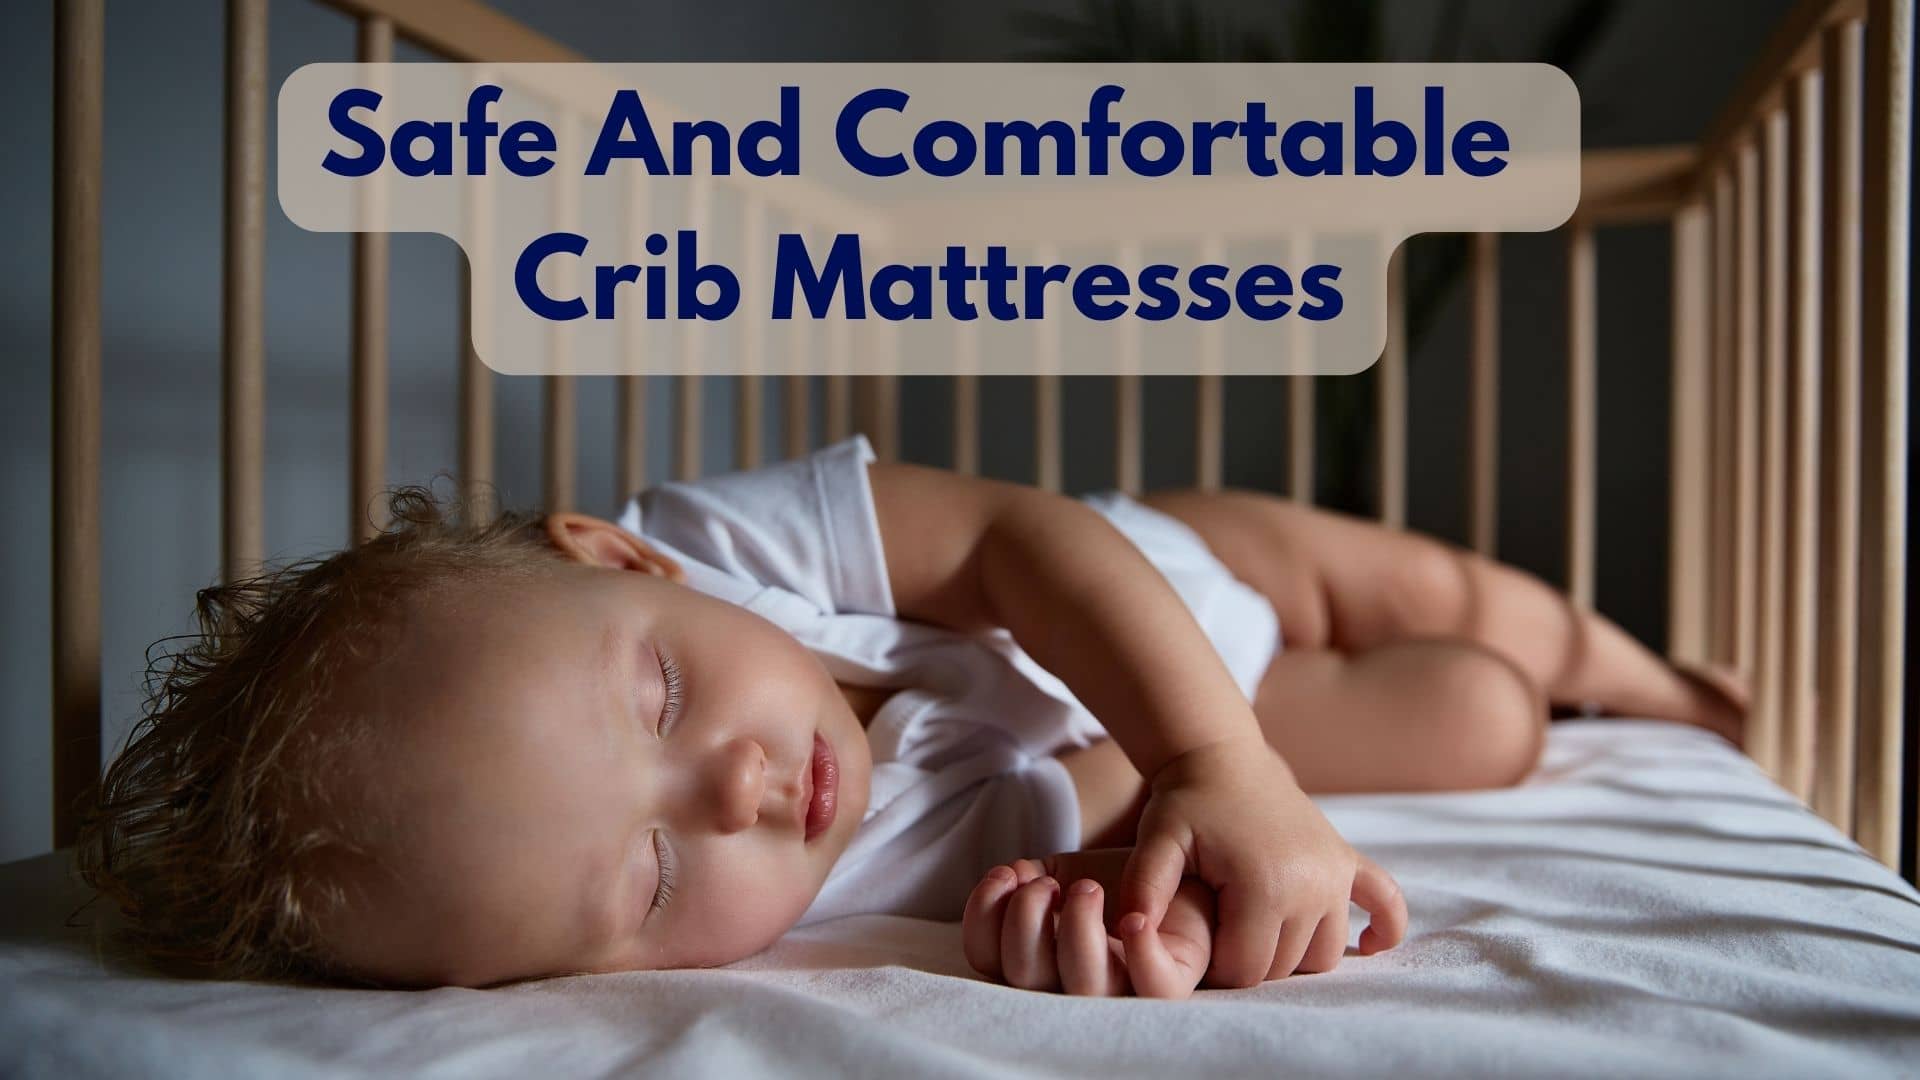 What Are Some Safe And Comfortable Crib Mattresses?